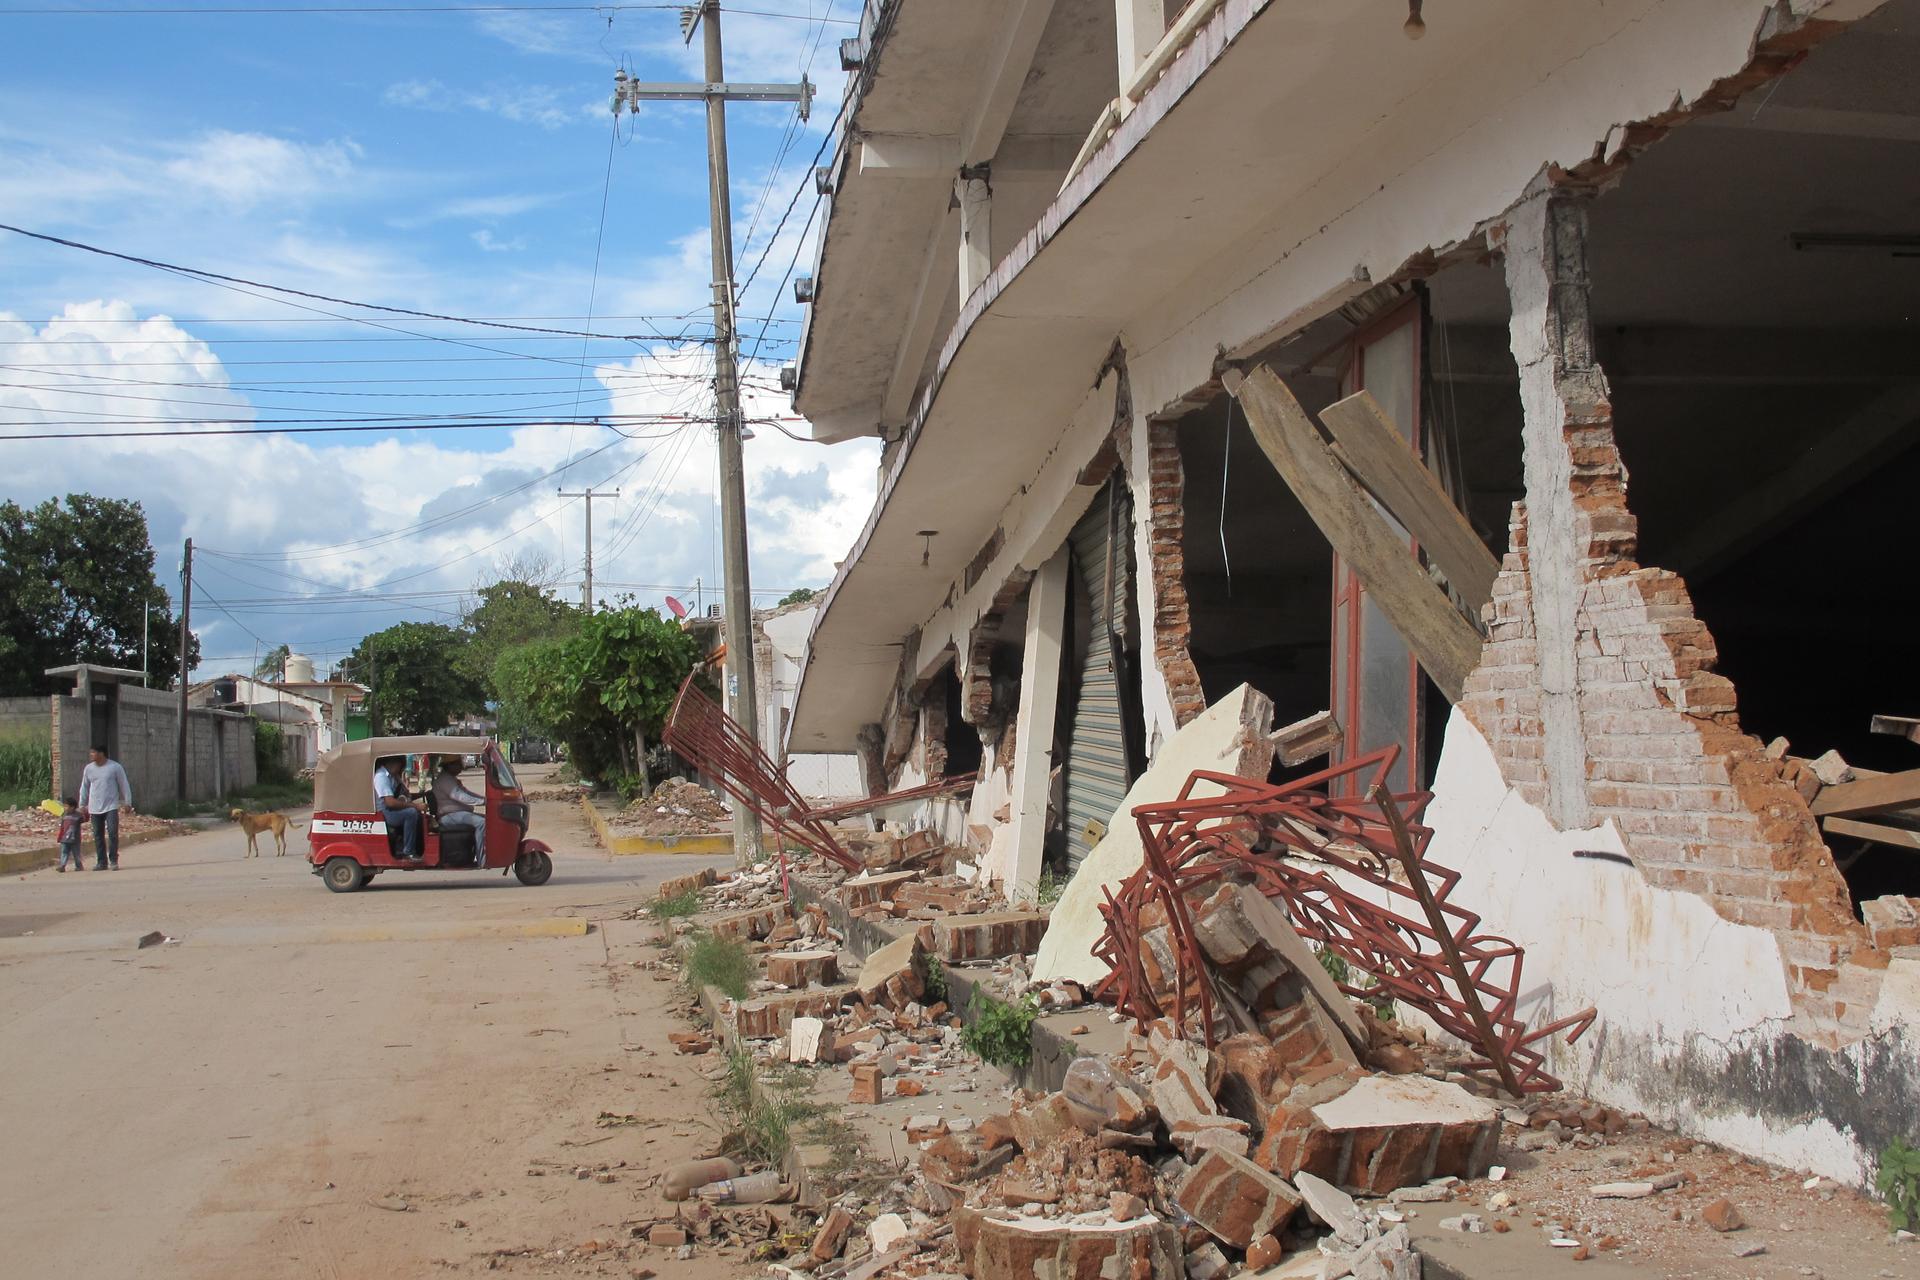 A damaged building in the town of Asuncion Ixtaltepec, Oaxaca. Central American migrants are helping with the rebuilding effort, either as volunteers or as construction workers.